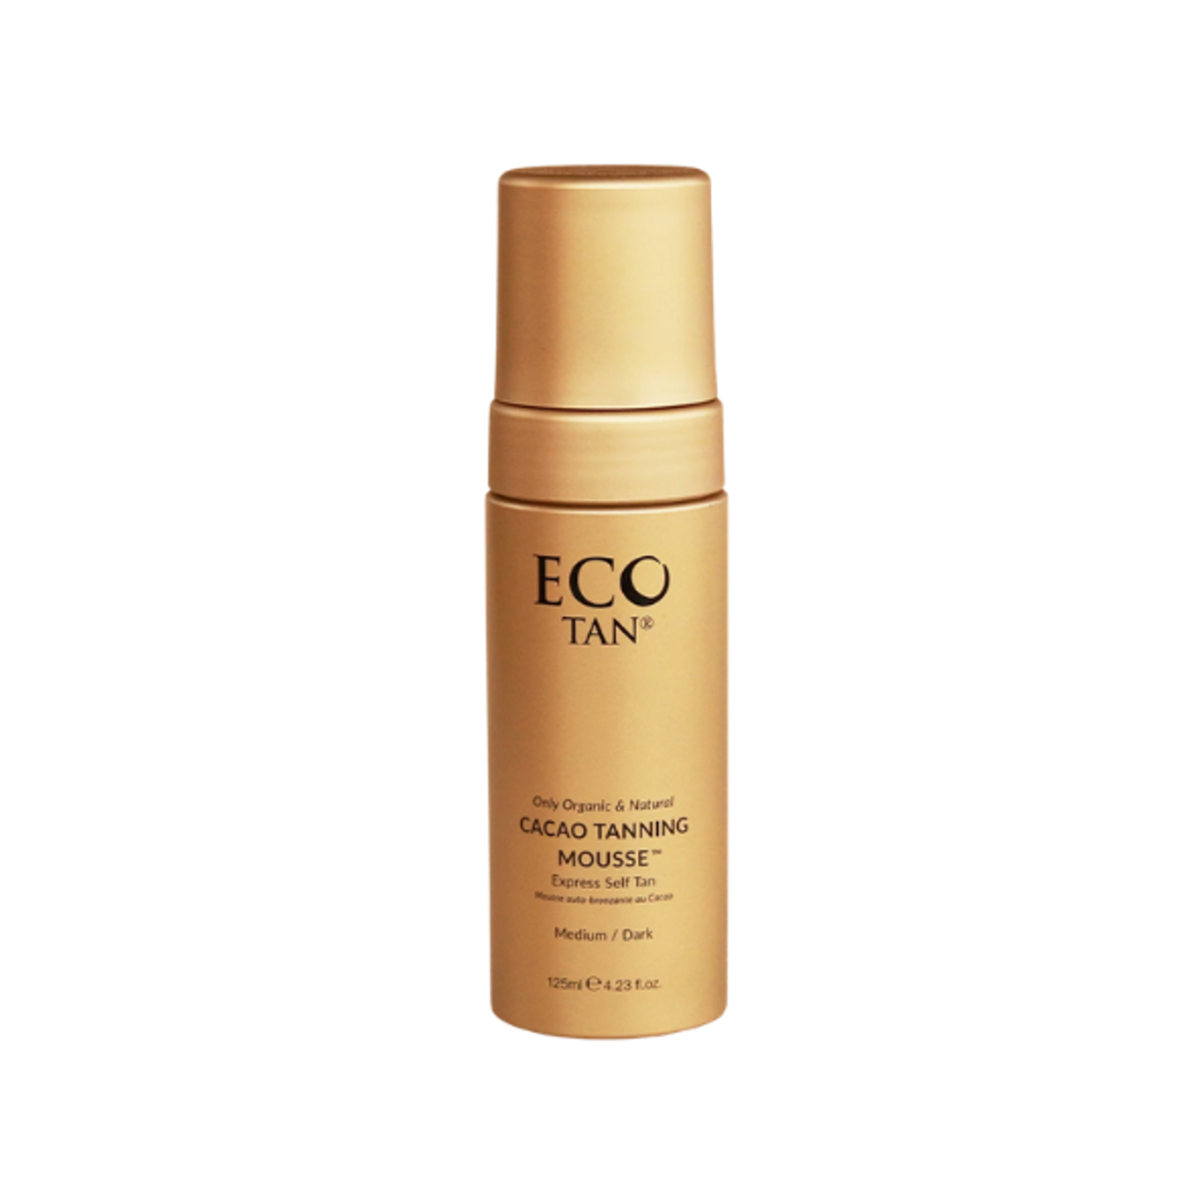 Cacao Tanning Mousse 125ml